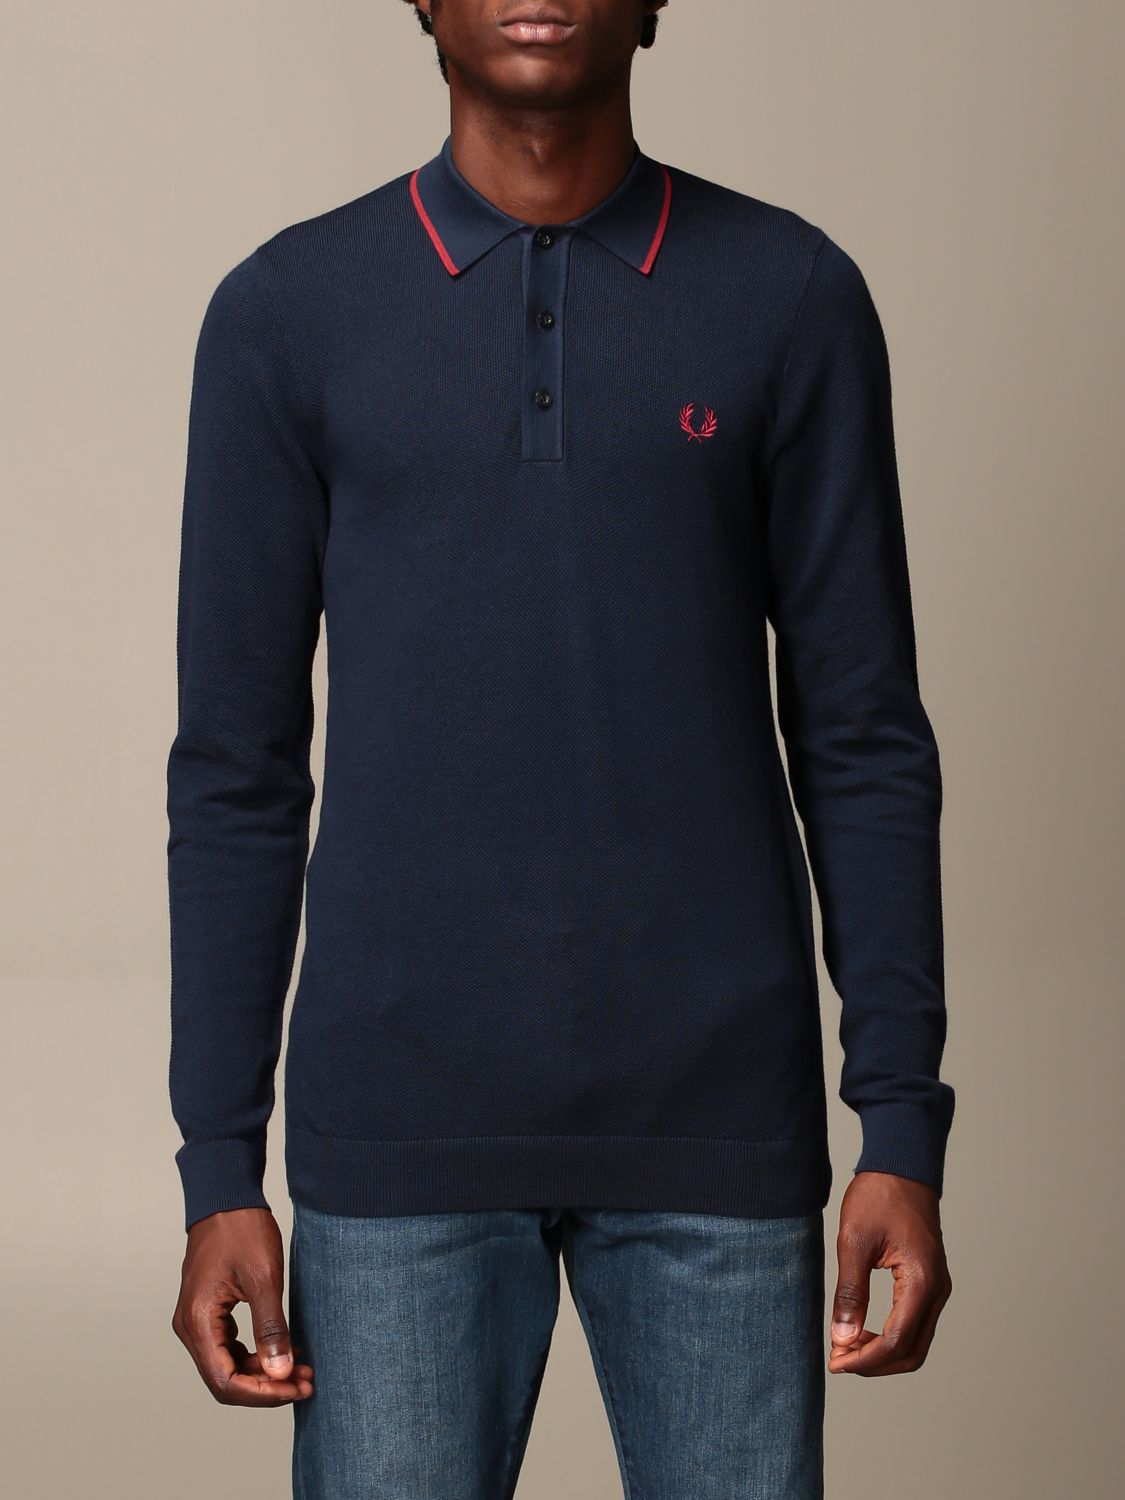 FRED PERRY: polo shirt with logo - Blue | Fred Perry polo shirt K9550 ...